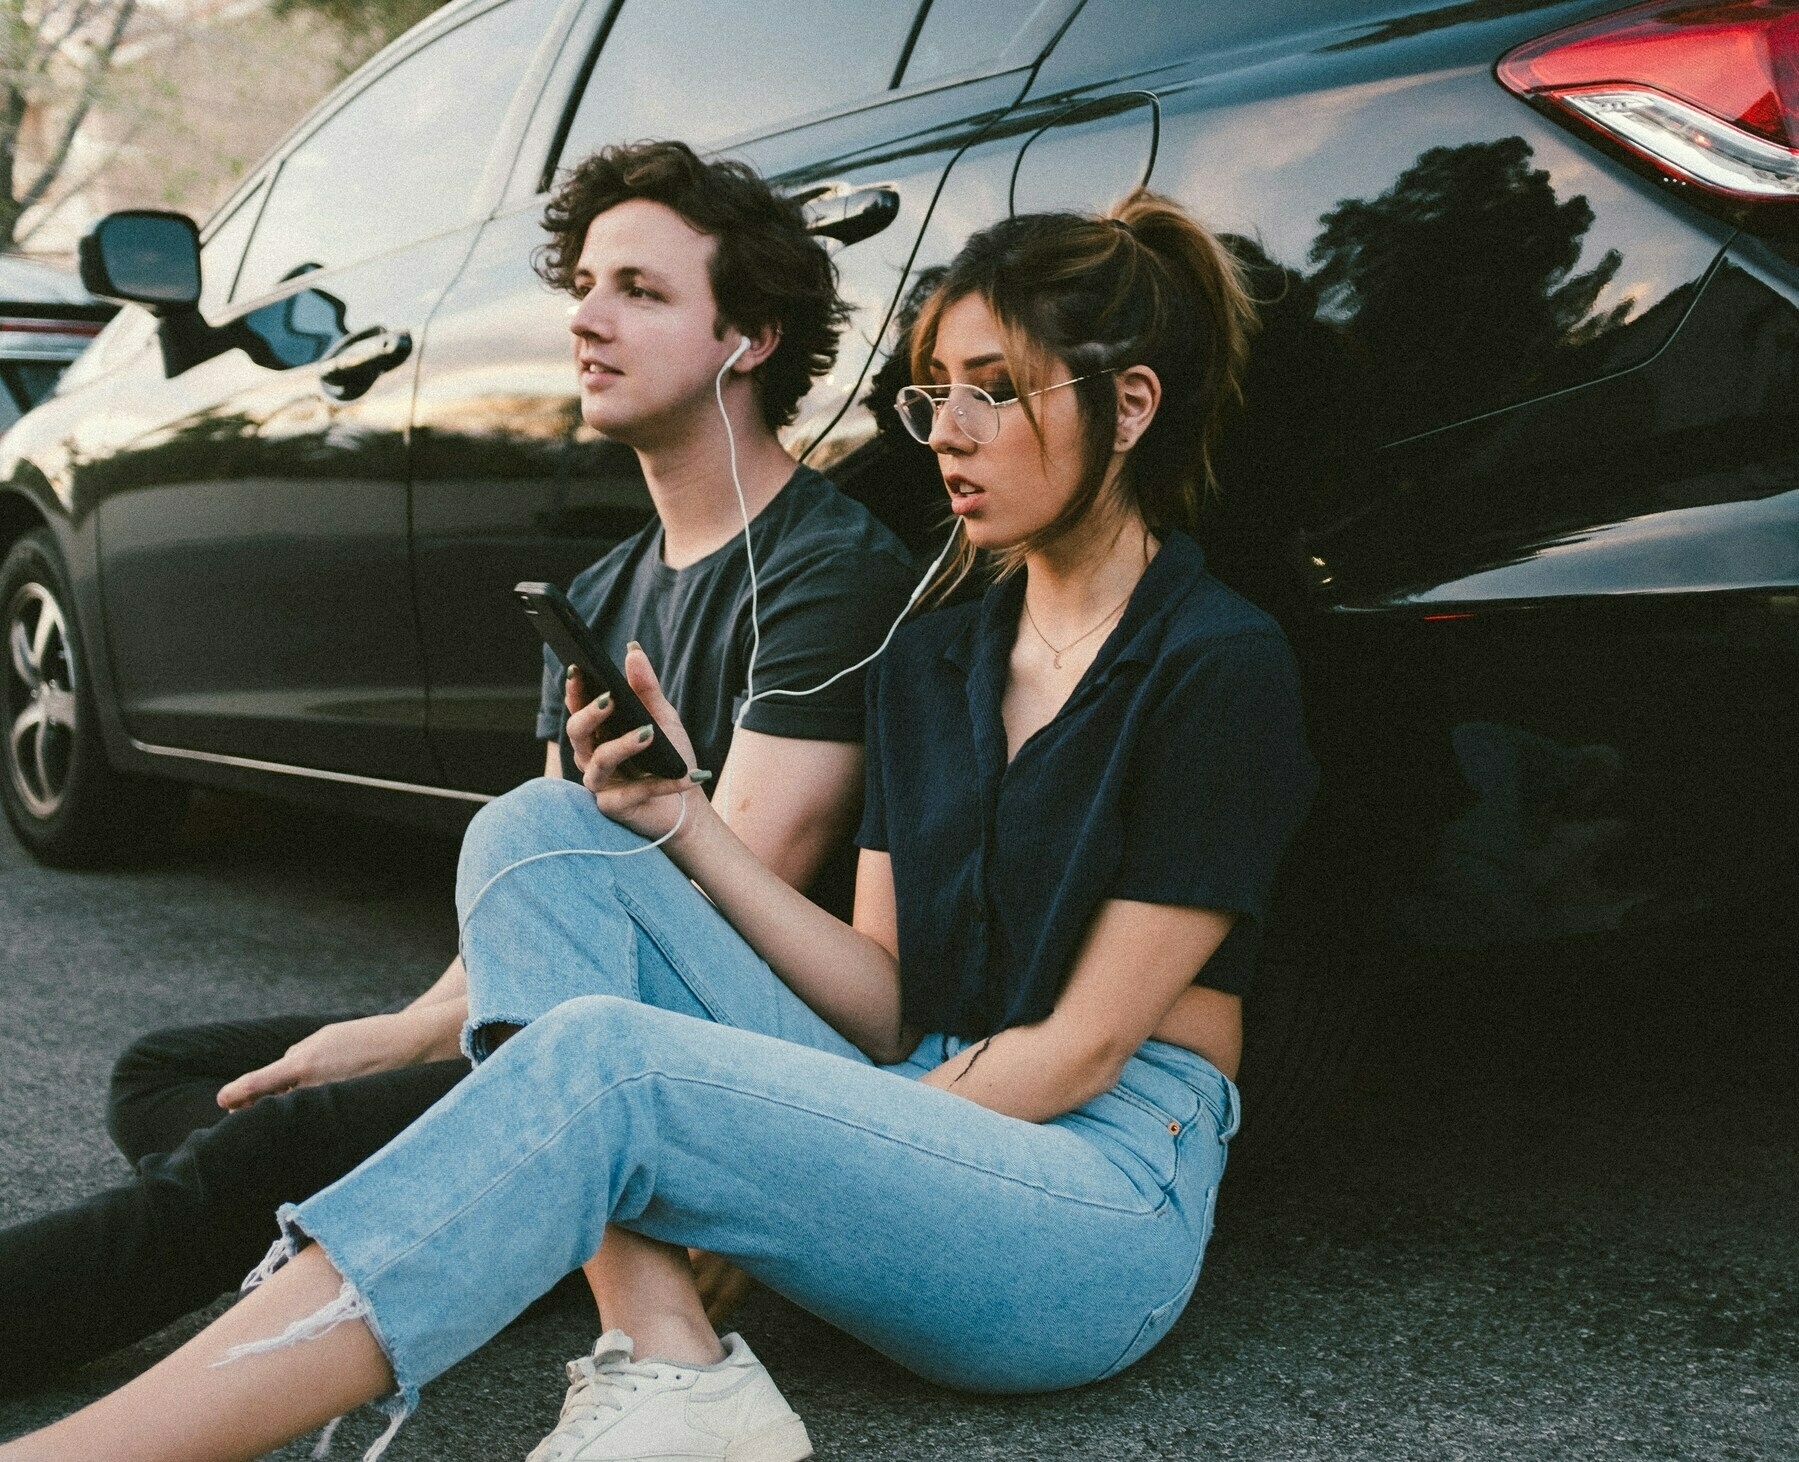 Two young people sitting on the ground with their backs to a car, sharing an earbud each 